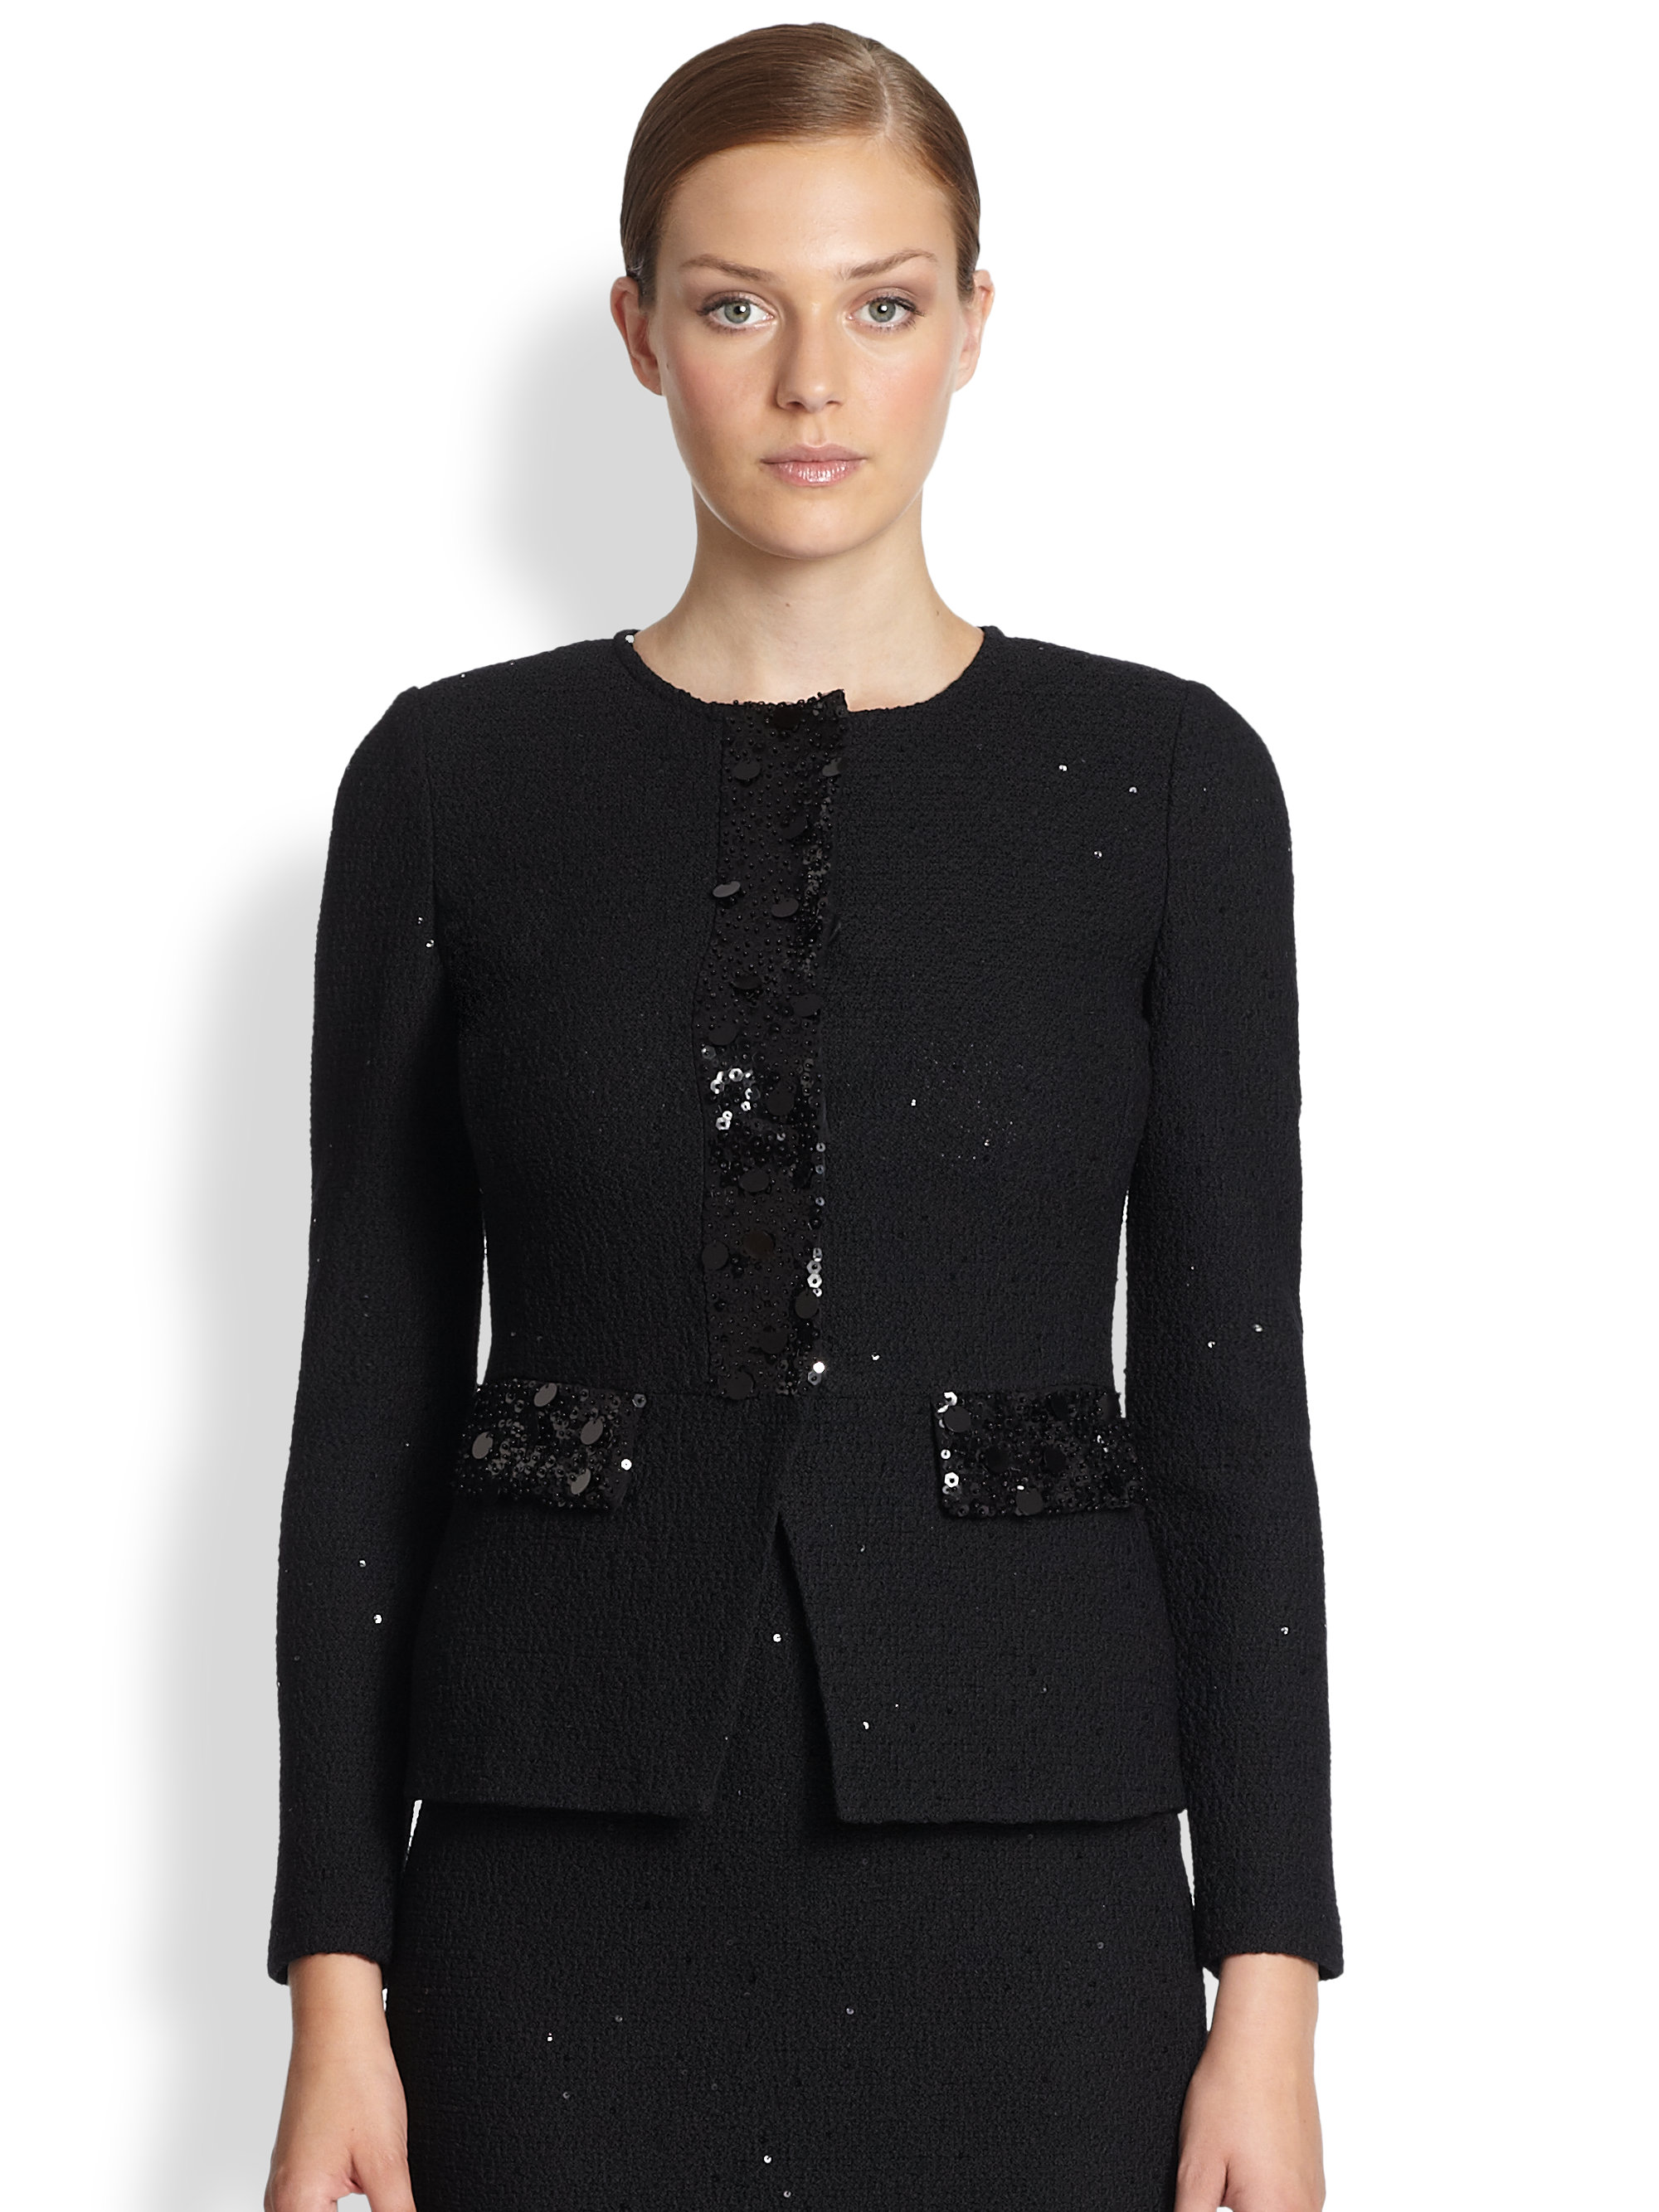 Lyst - St. John Long Sleeve Knit Jacket with Sequin Paillettes in Black